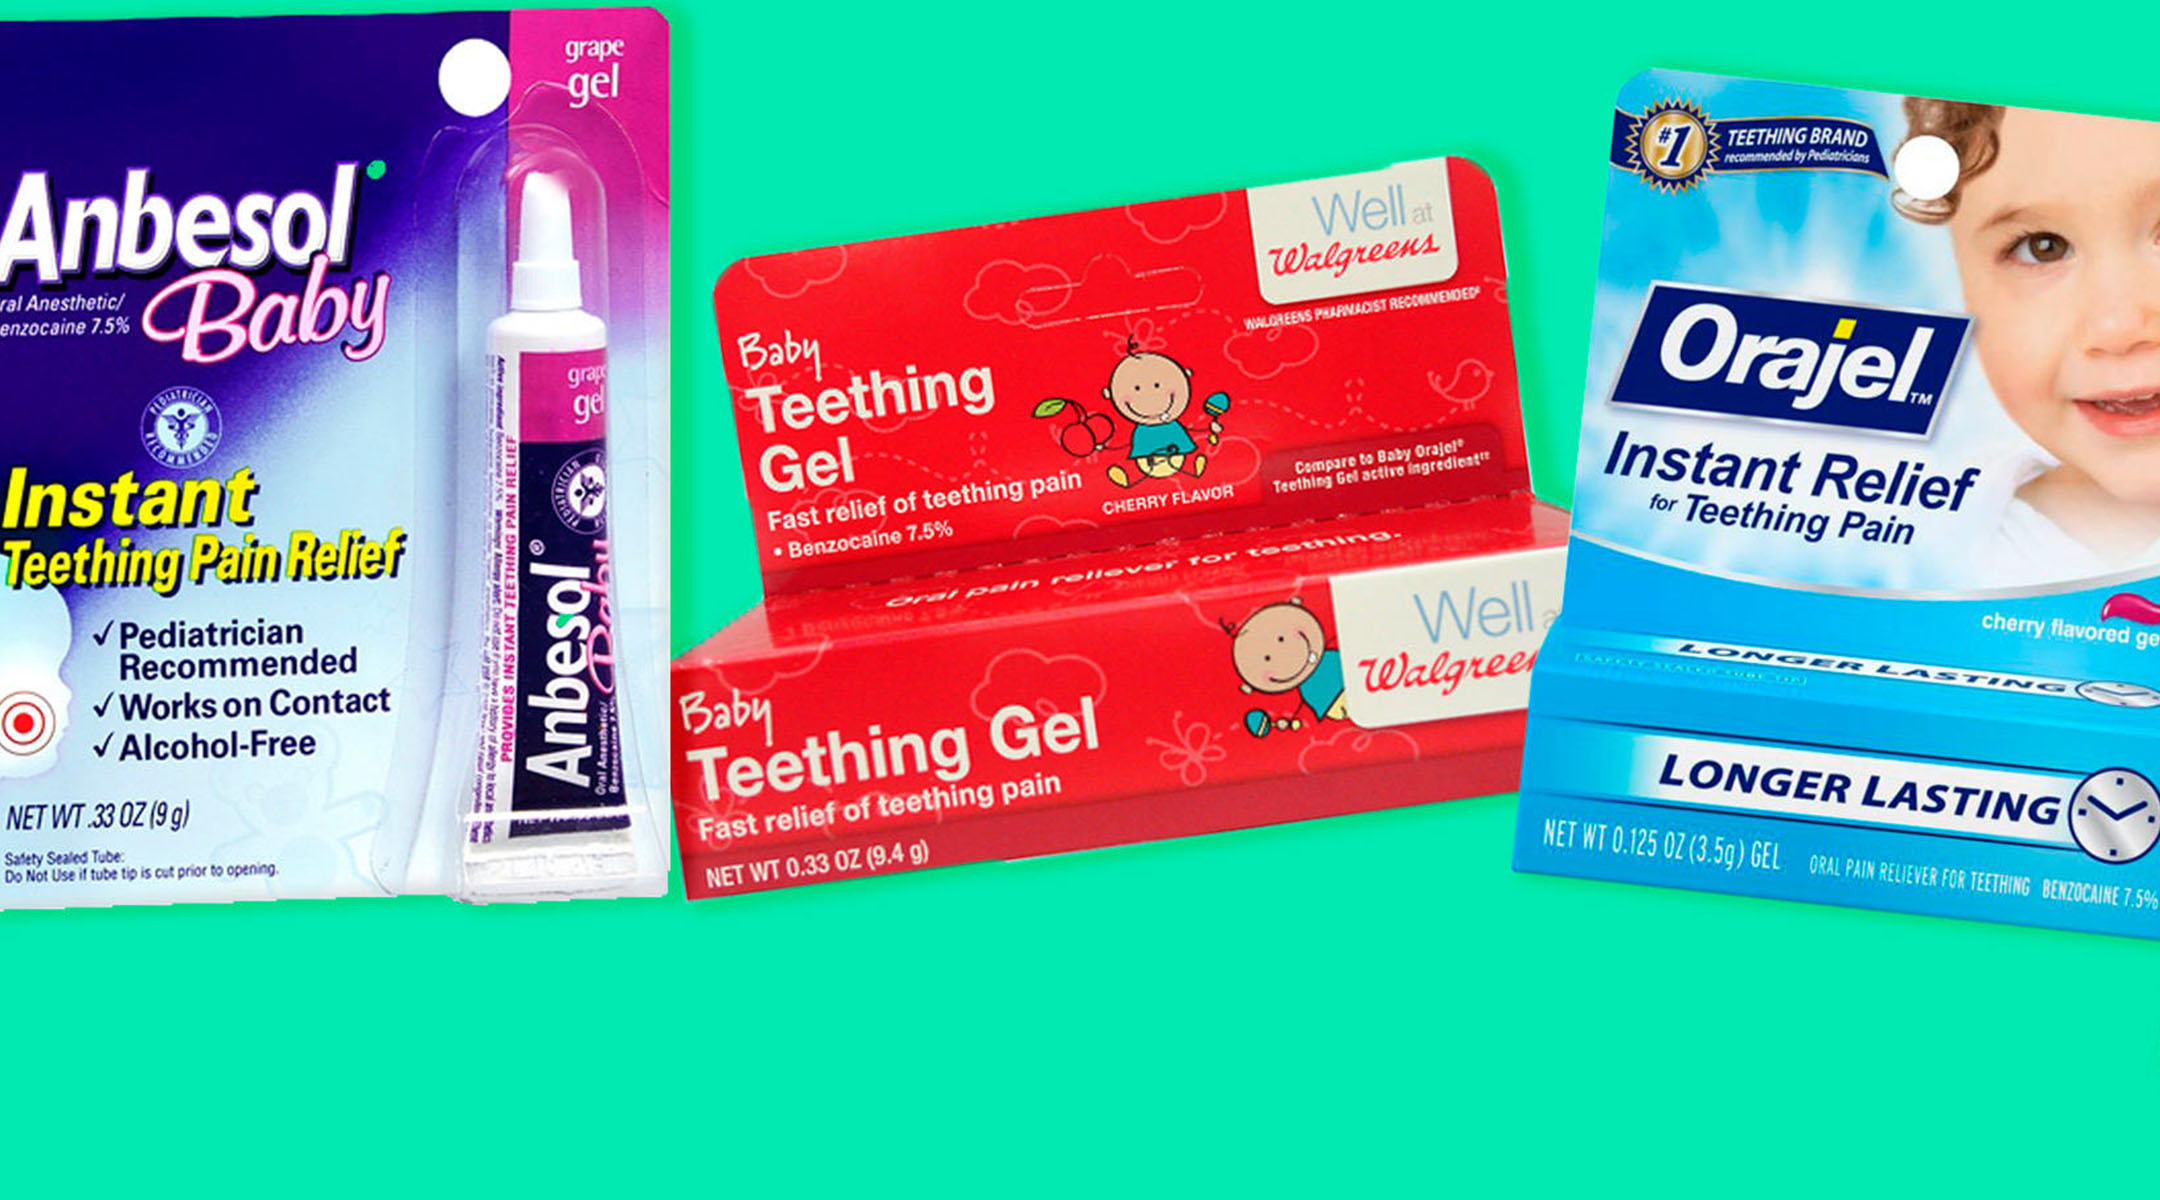 teething gel products deemed unsafe by fda